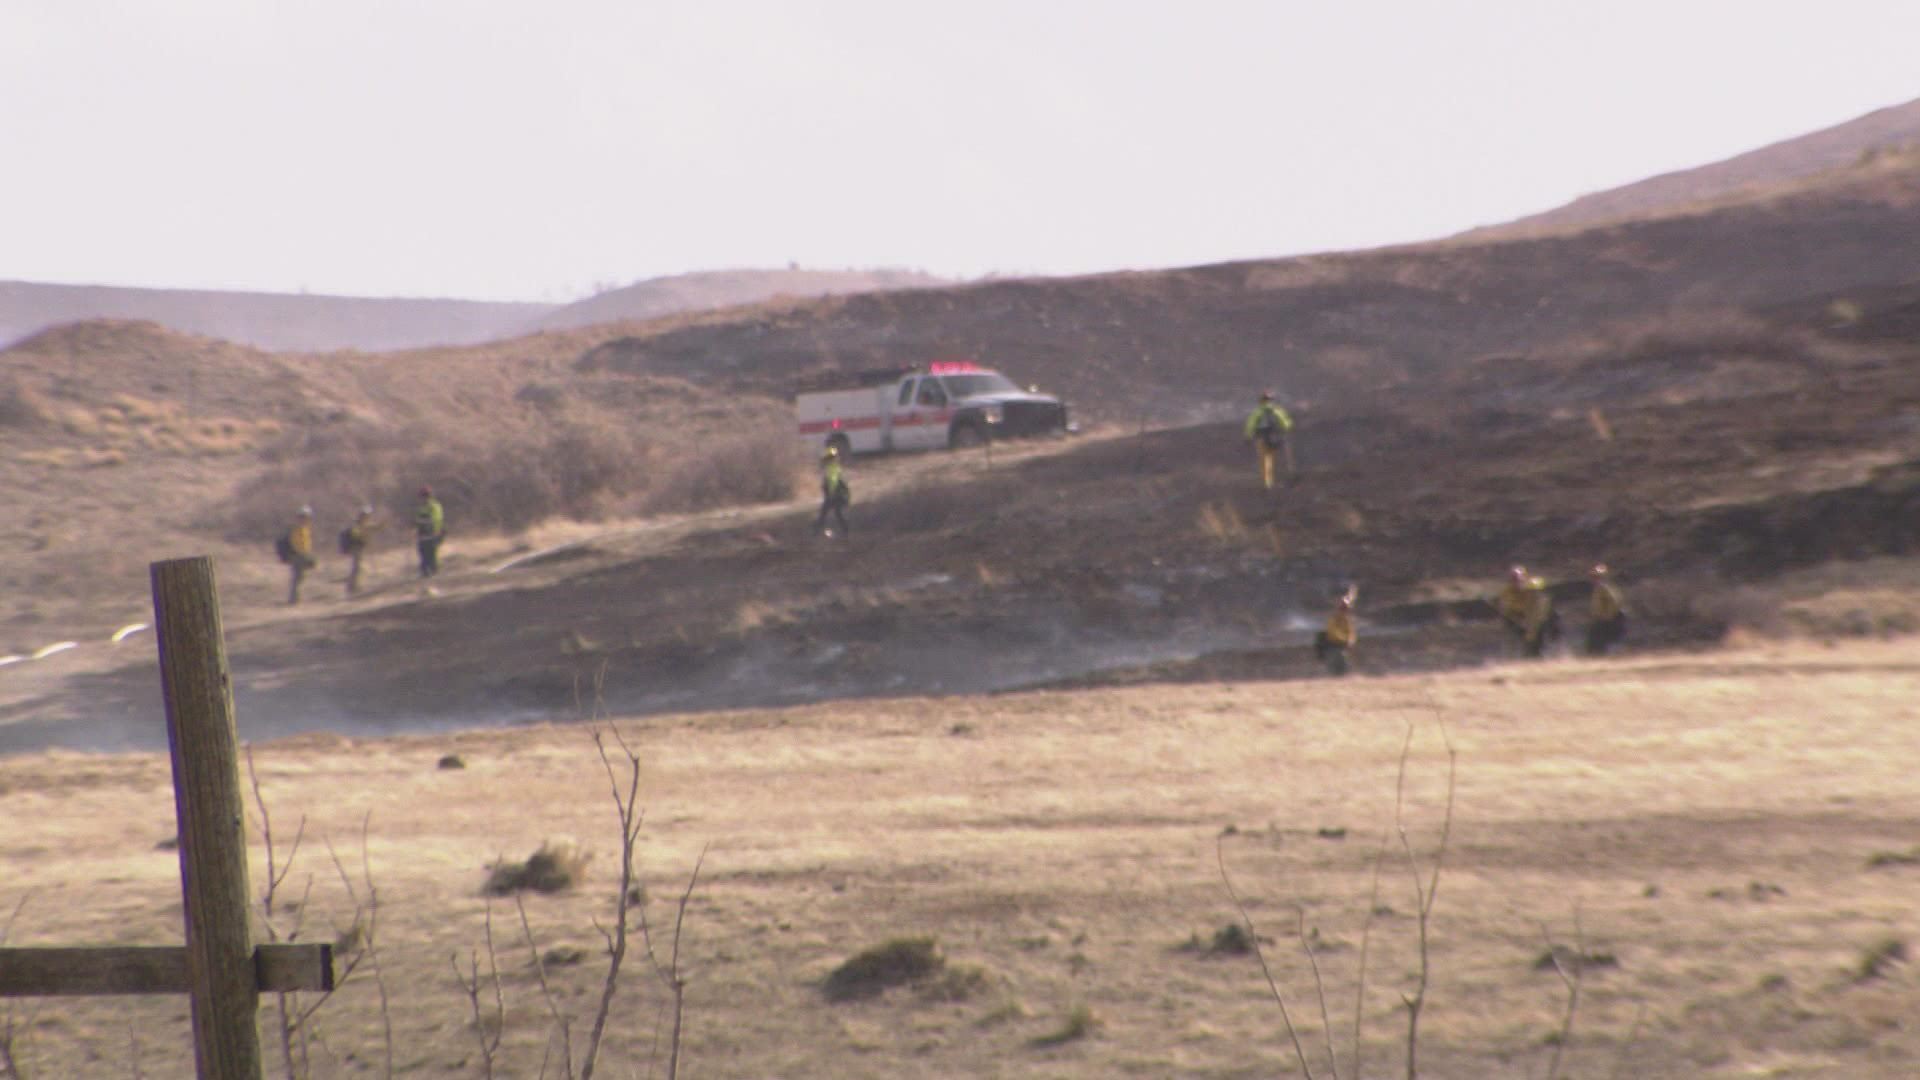 Several fires have started recently in Boulder County, keeping fire crews busy and looking for some relief.